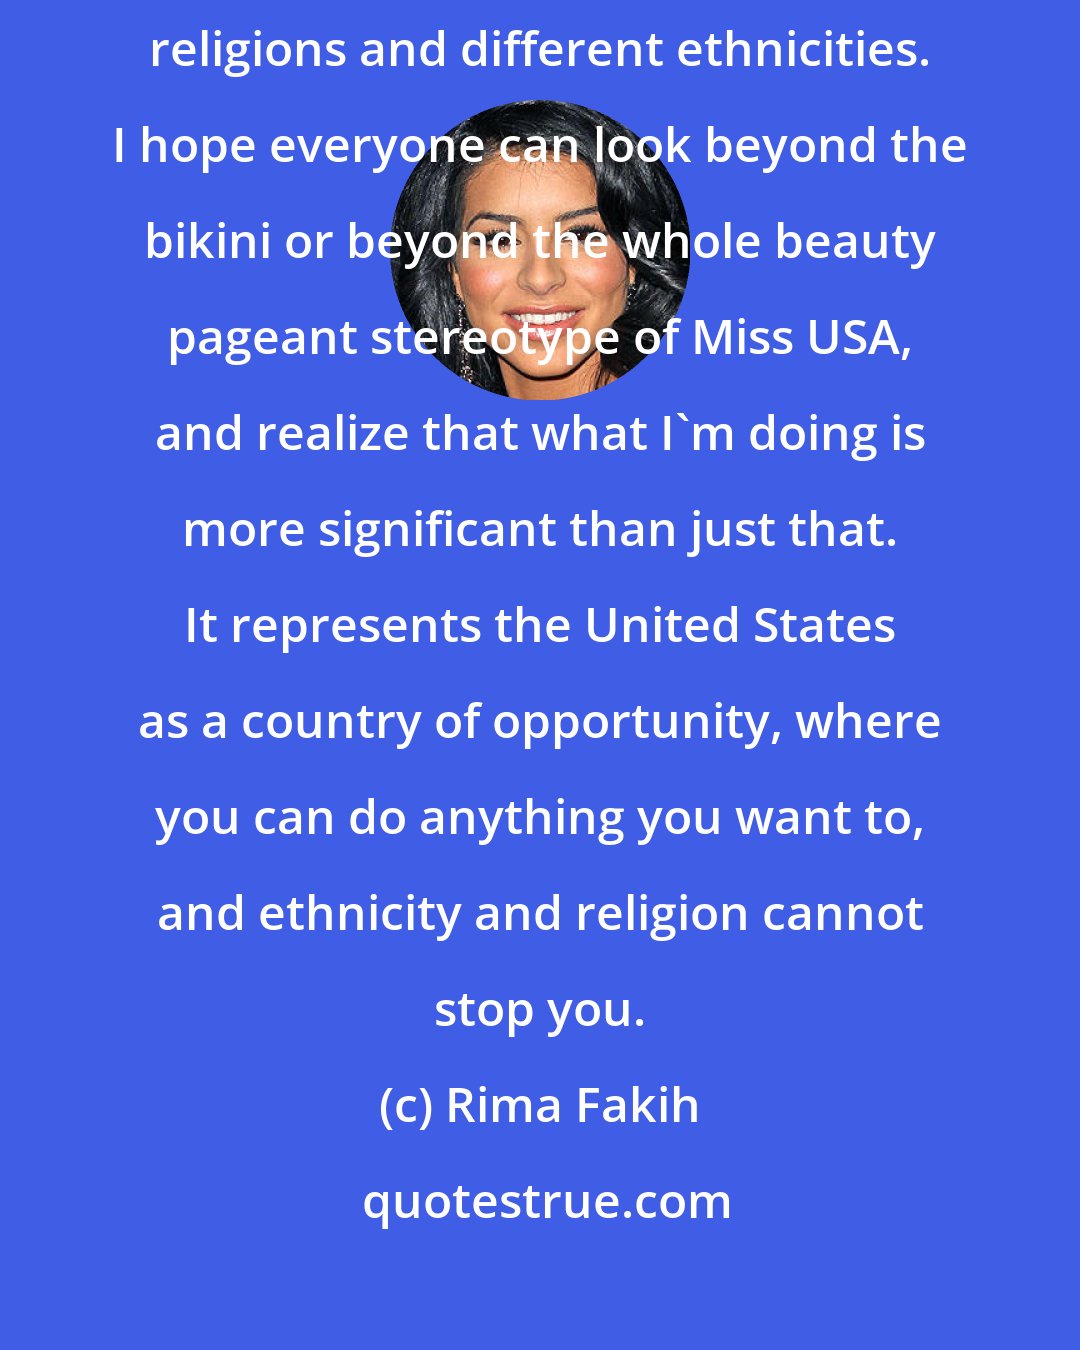 Rima Fakih: I consider myself to be blessed. I have a family that is a mix of different religions and different ethnicities. I hope everyone can look beyond the bikini or beyond the whole beauty pageant stereotype of Miss USA, and realize that what I'm doing is more significant than just that. It represents the United States as a country of opportunity, where you can do anything you want to, and ethnicity and religion cannot stop you.